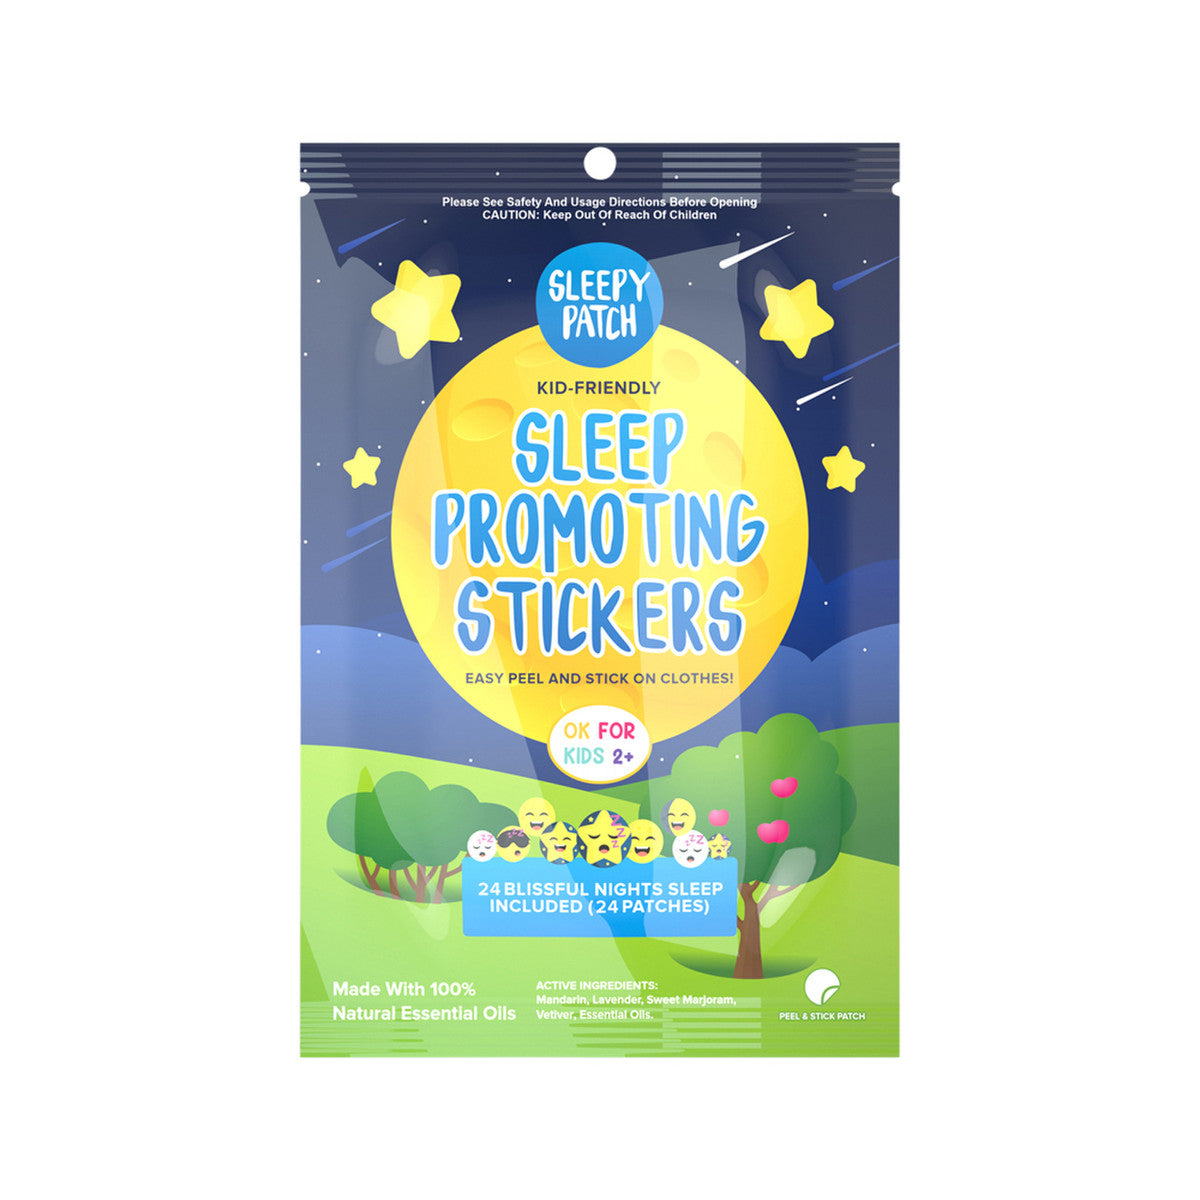 NATPAT (The Natural Patch Co.) - SleepyPatch Organic Sleep Promoting Stickers